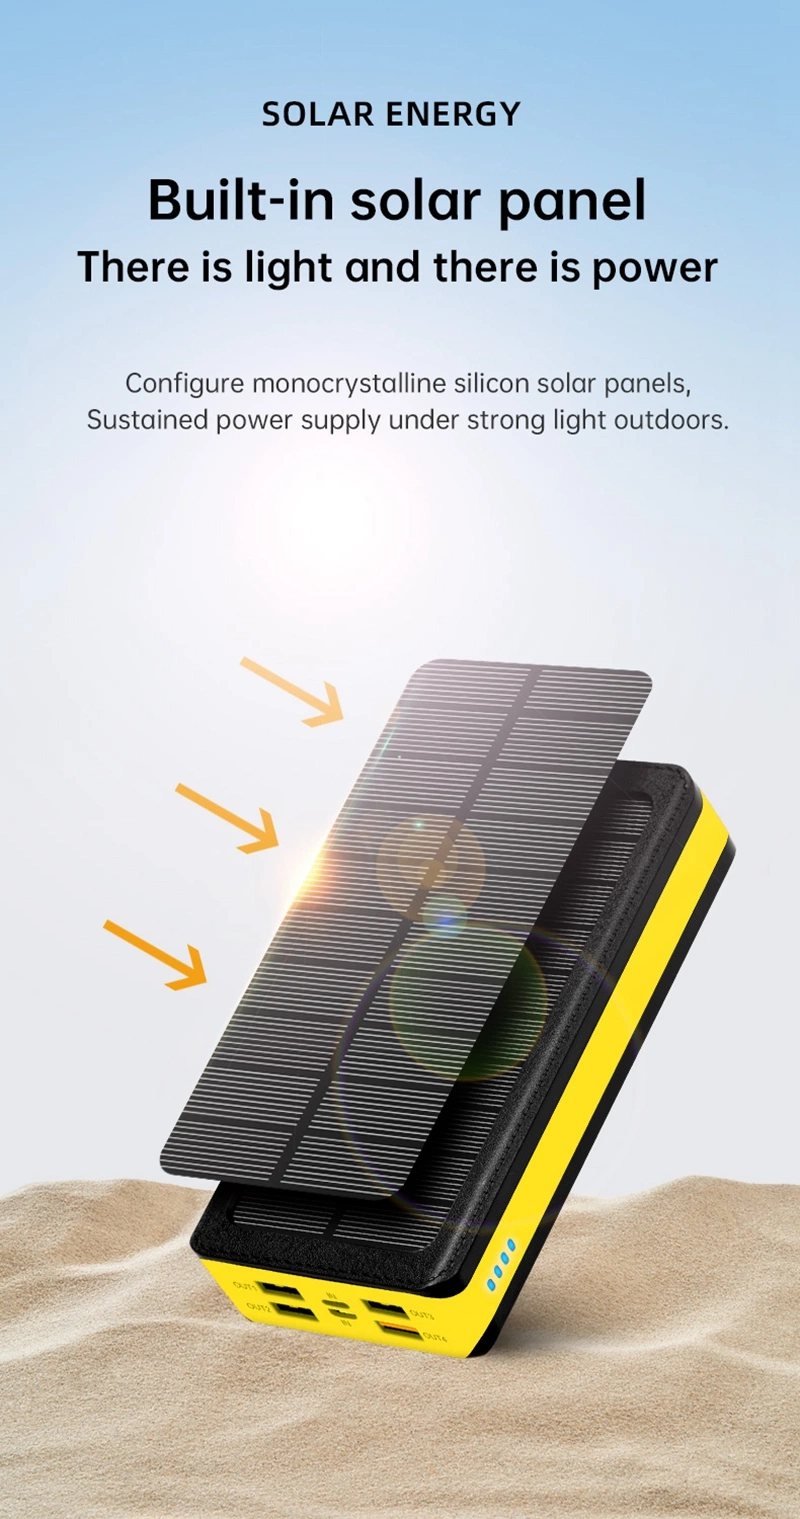 Factory Travel Style 30000mAh Big Capacity Outdoor Power Bank 6output 2 Input Support Mobile Wireless Charging Pd 22.5W Fast Solar USB Phone Charger